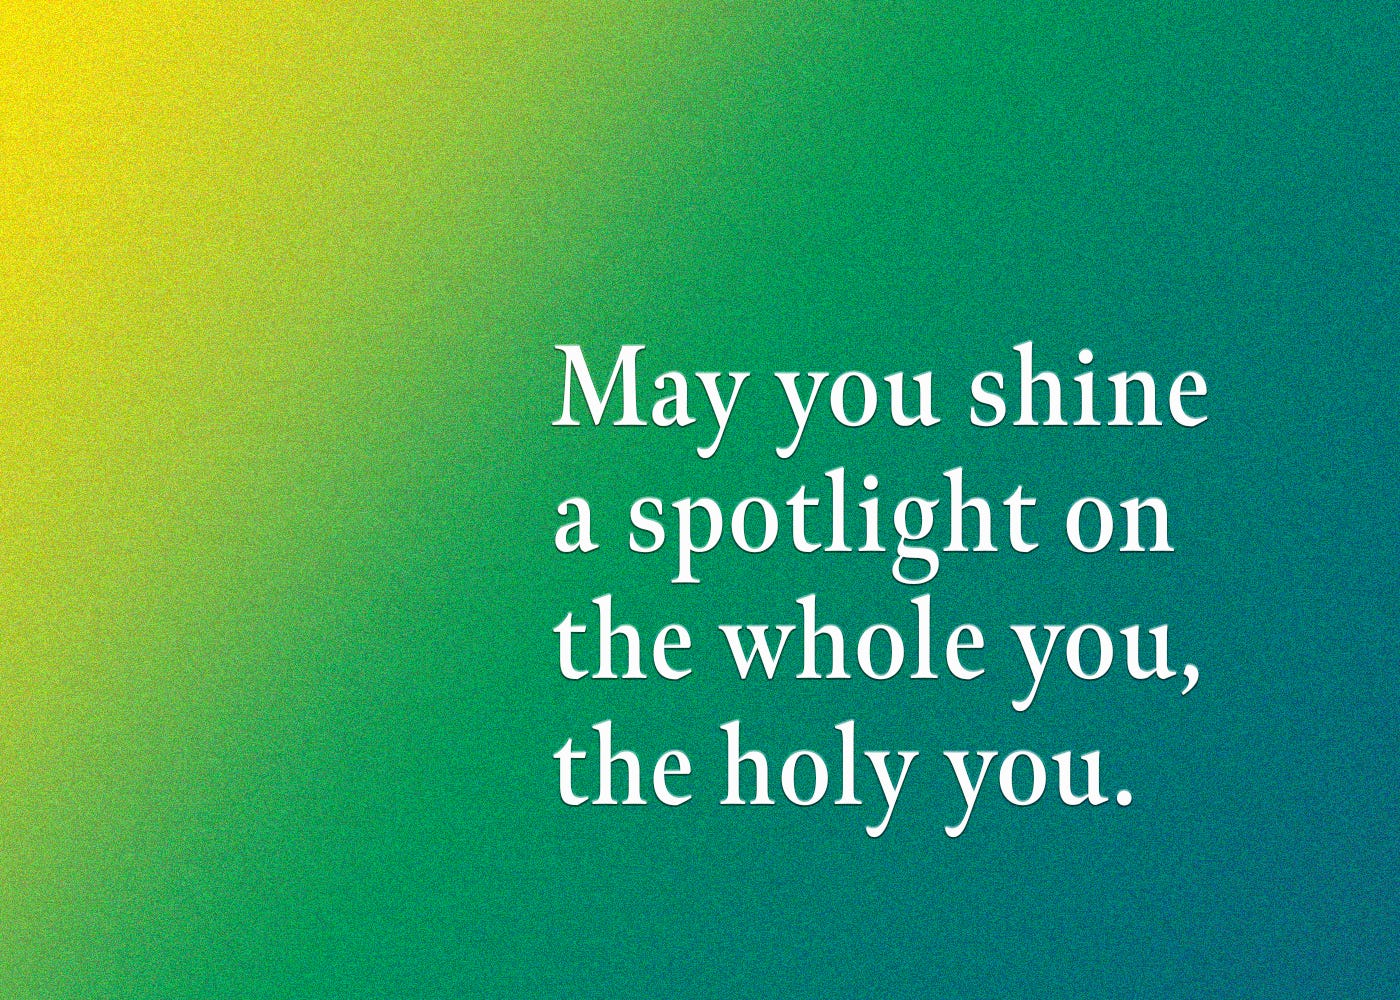 My you shine a spotlight on the whole you, the holy you